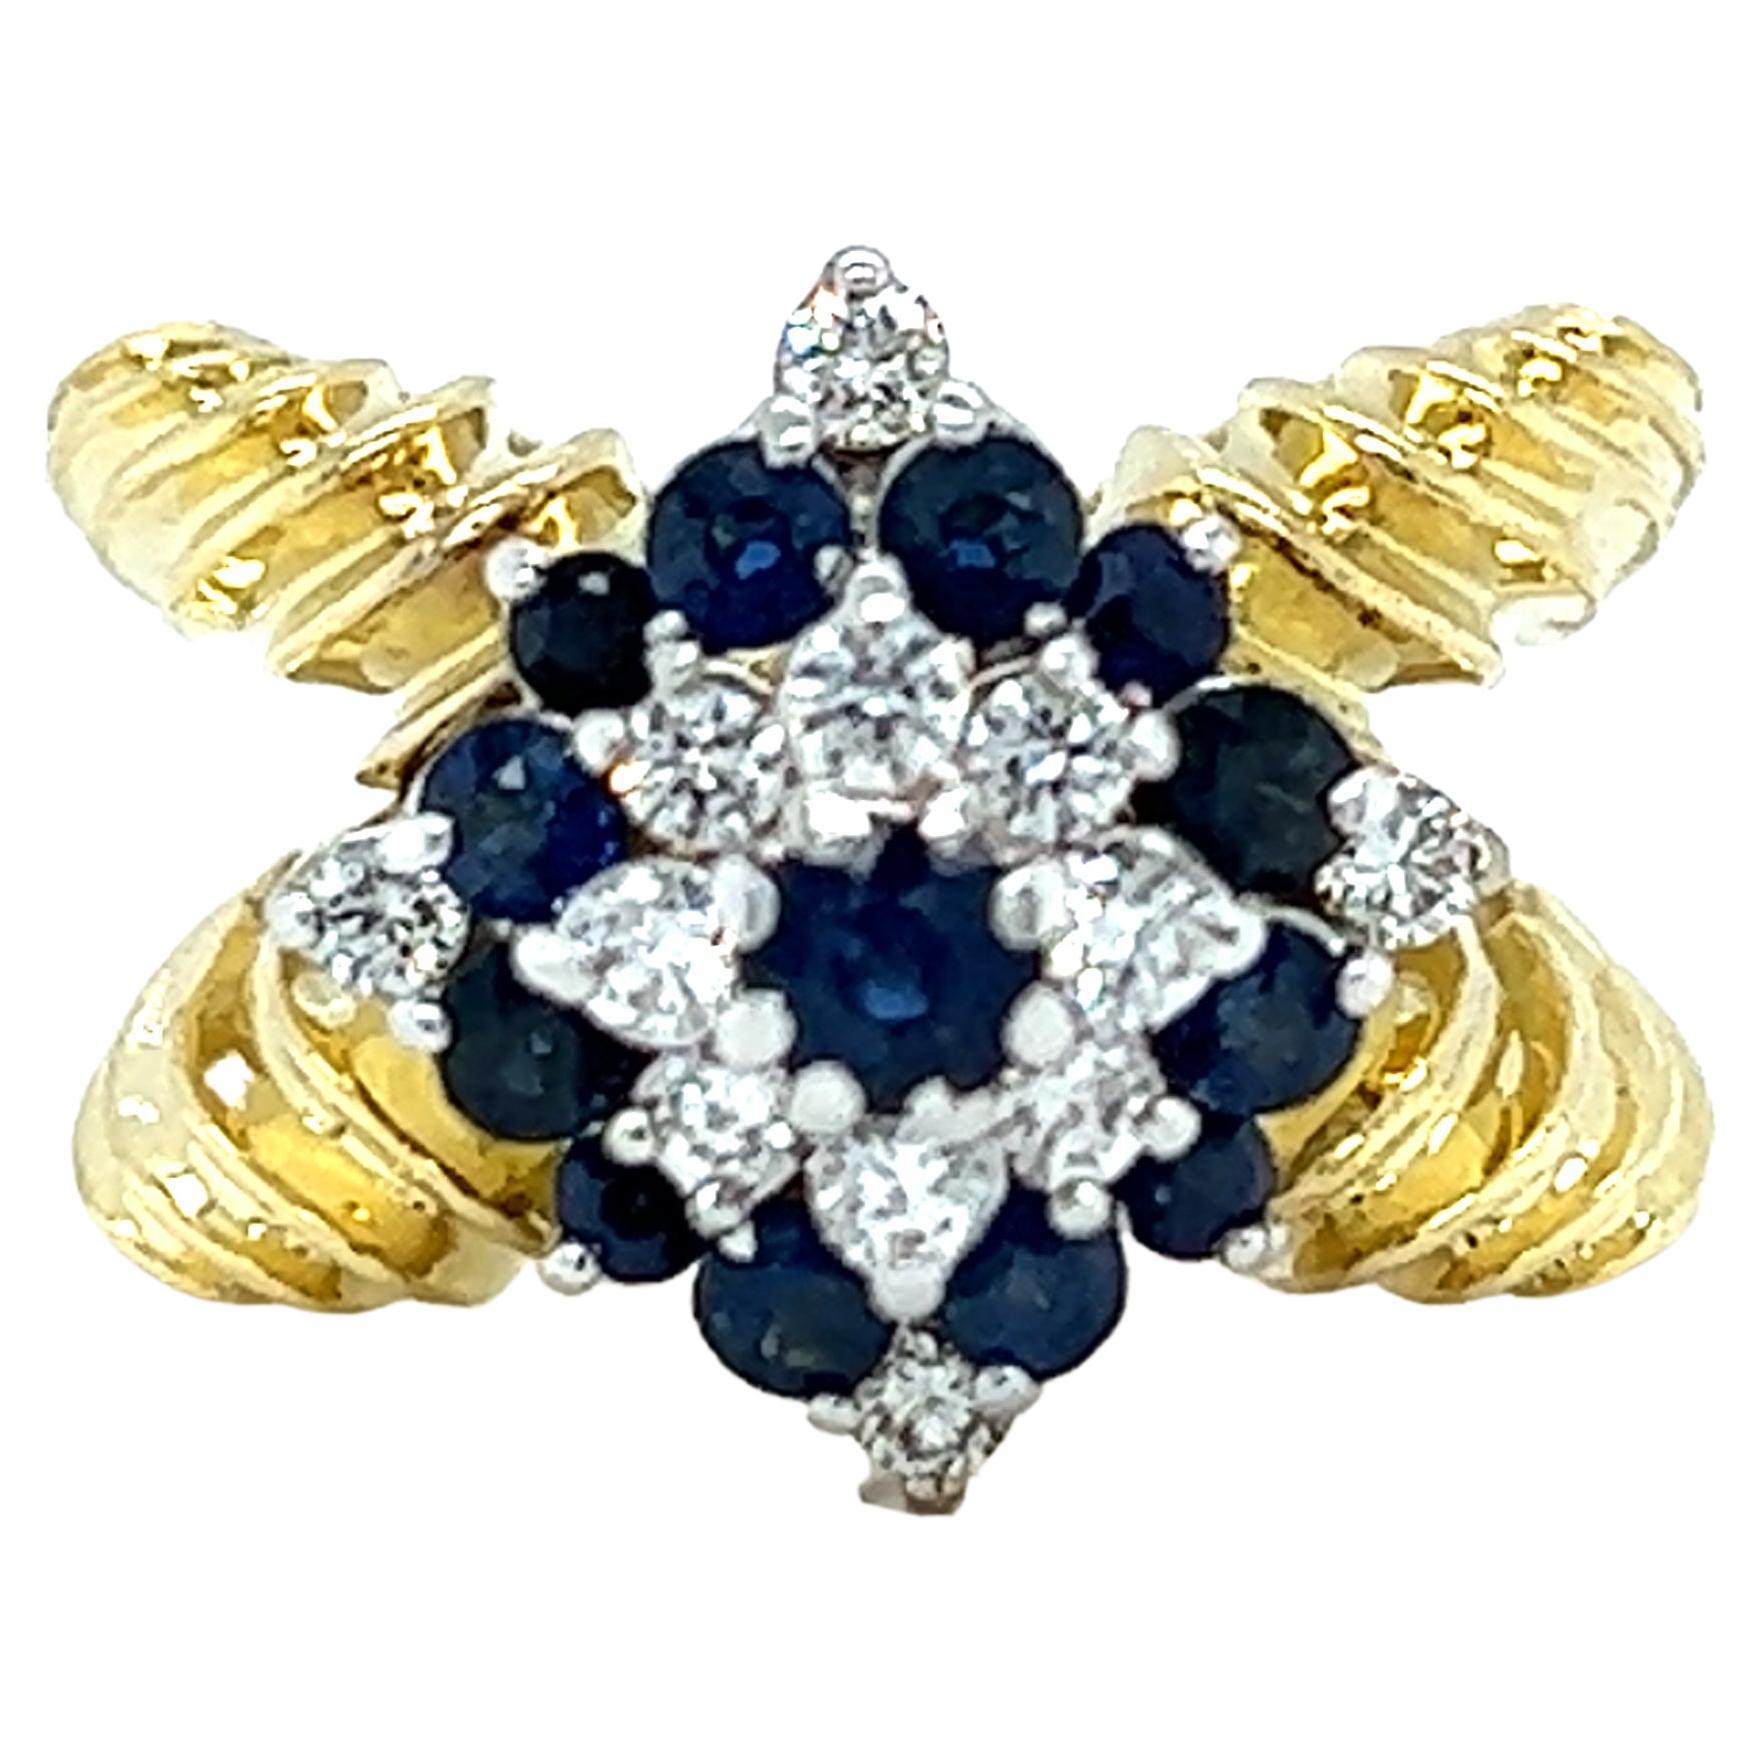 Twin Shank Sapphire and Diamond Ring in 18K Yellow Gold 